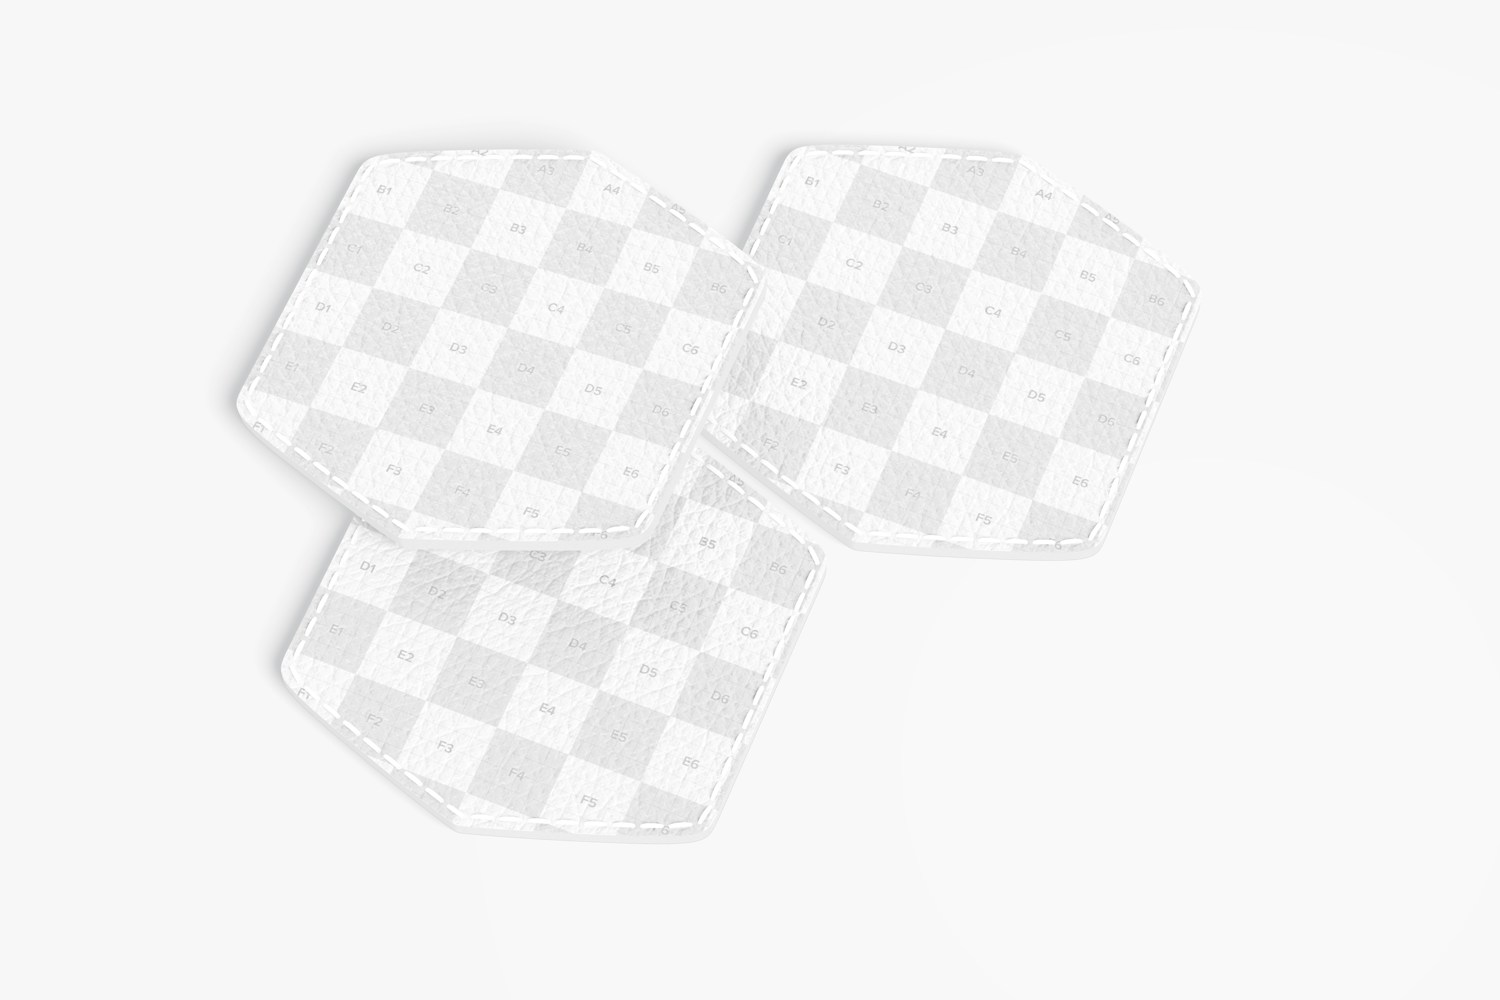 Hexagon Leather Clothing Tags Mockup, Top View